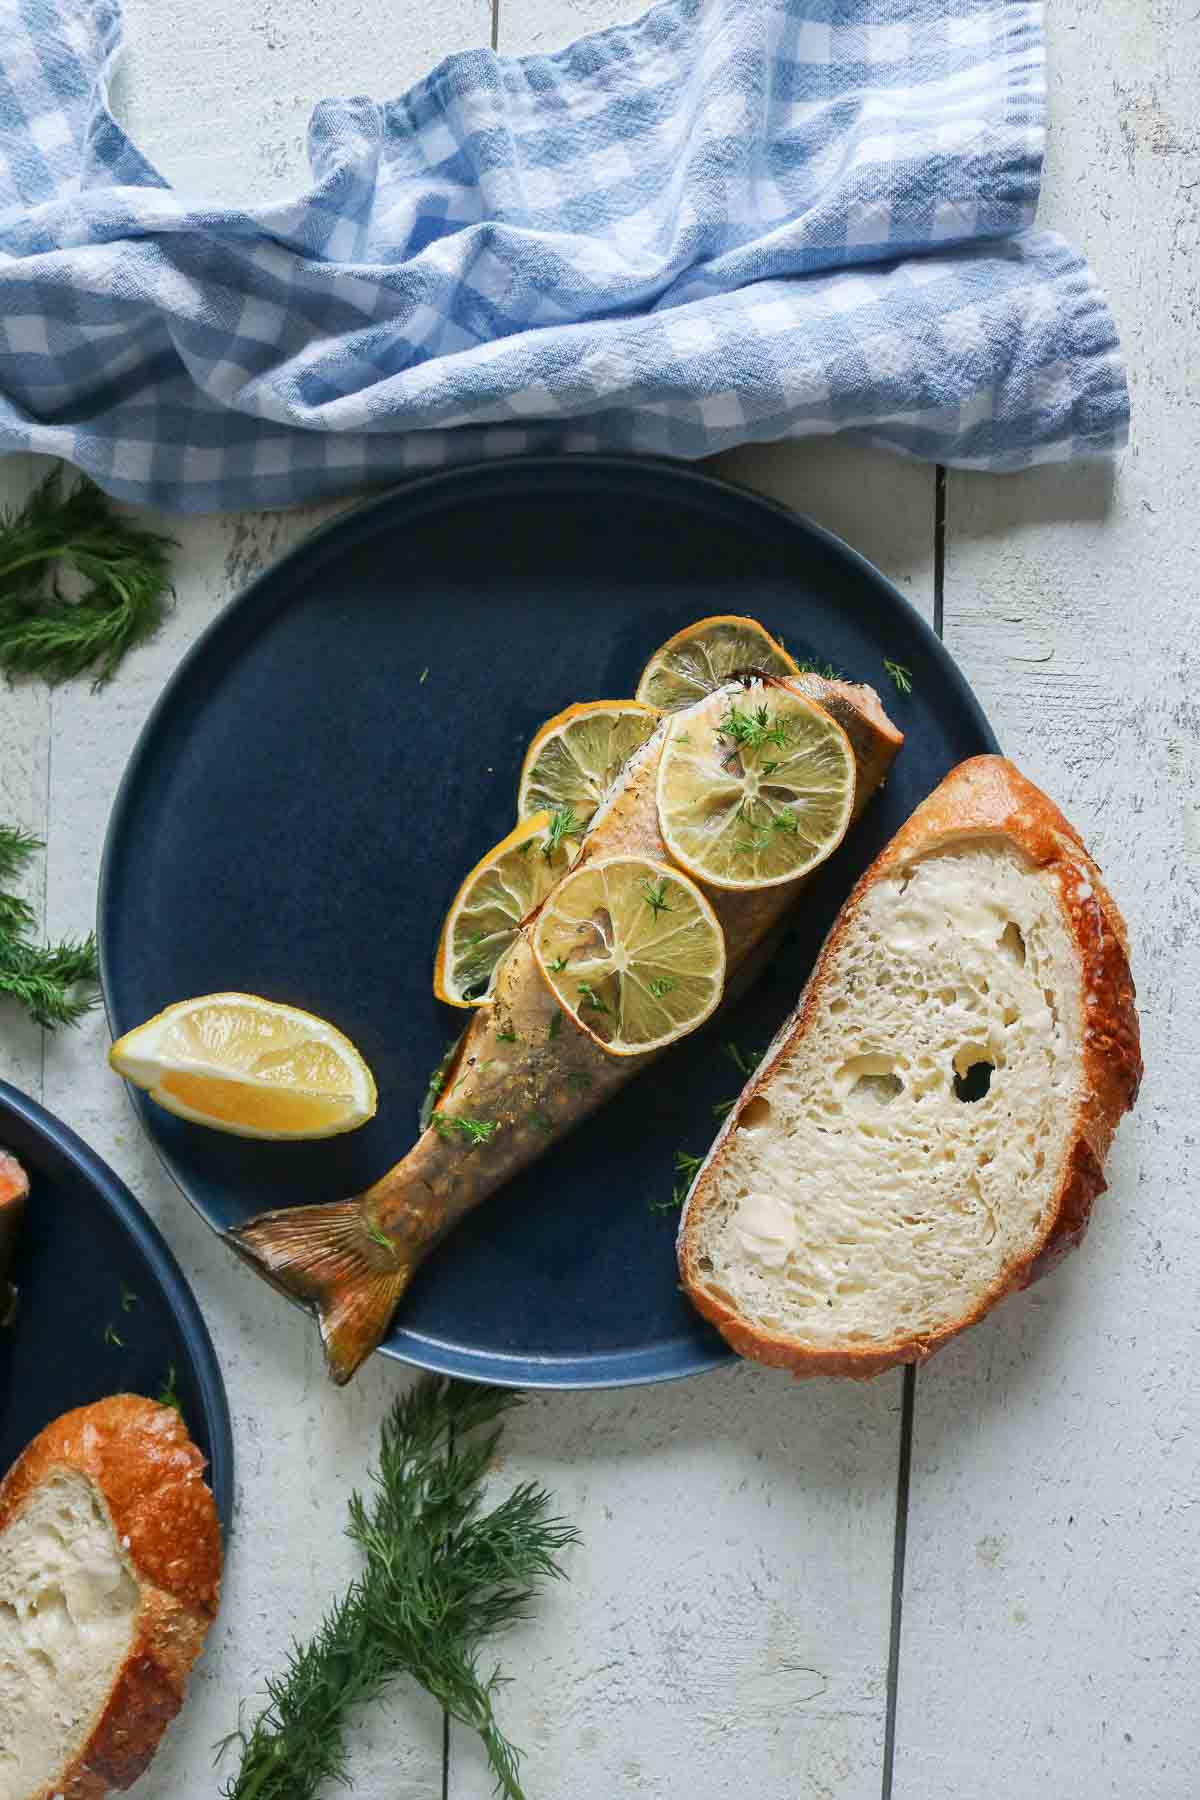 Baked trout with a slice of bread and lemon wedge on a plate.